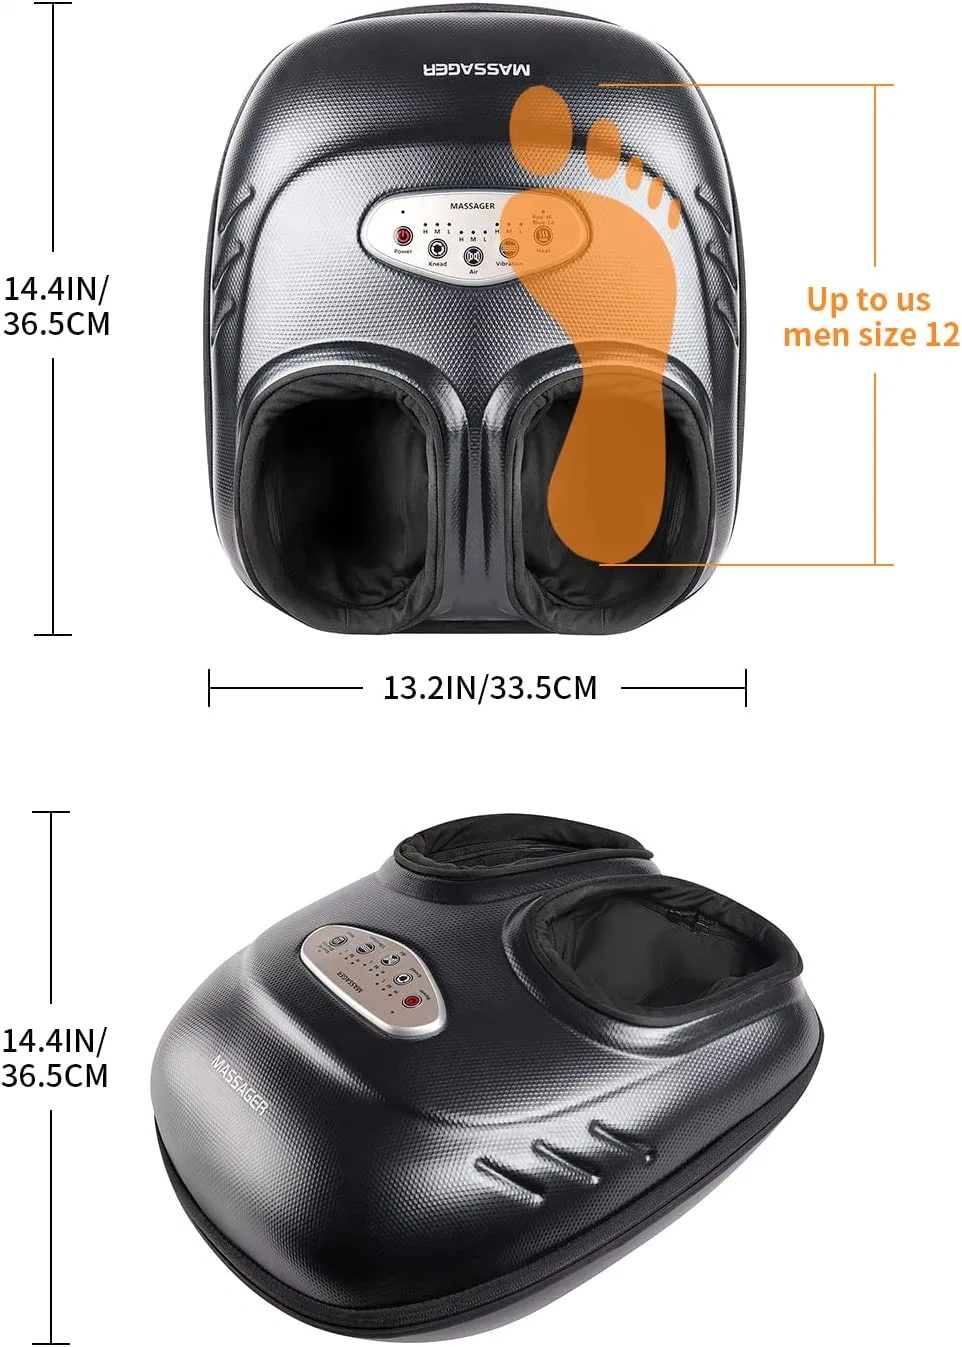 Health Care Airbag Electric Kneading Foot Massager Machine with 24V